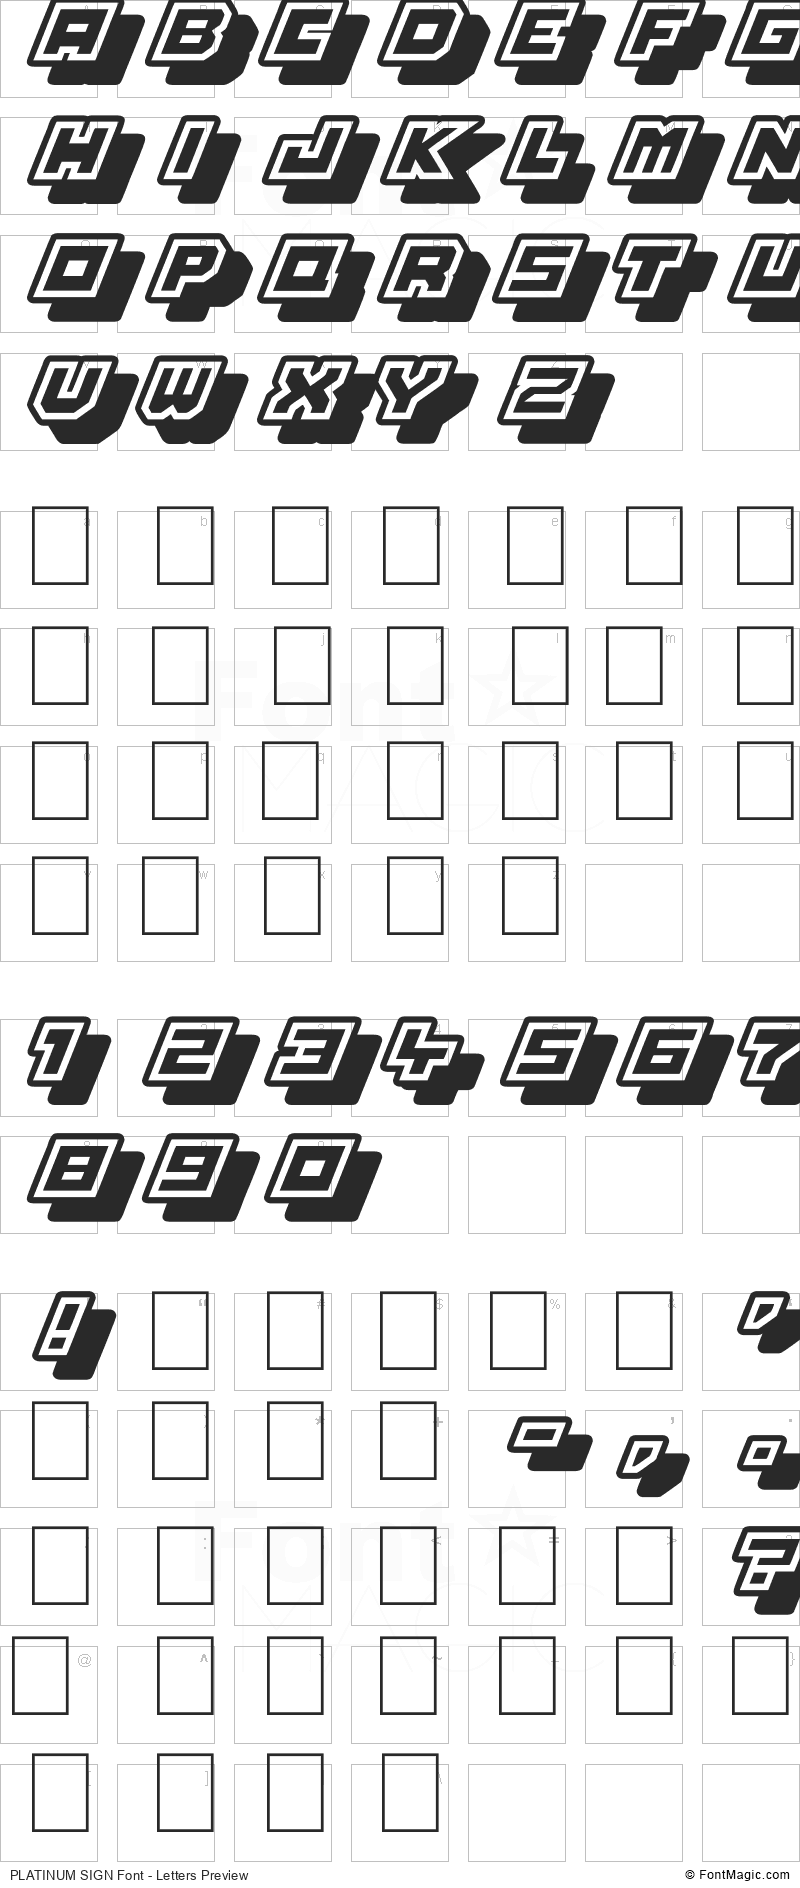 PLATINUM SIGN Font - All Latters Preview Chart